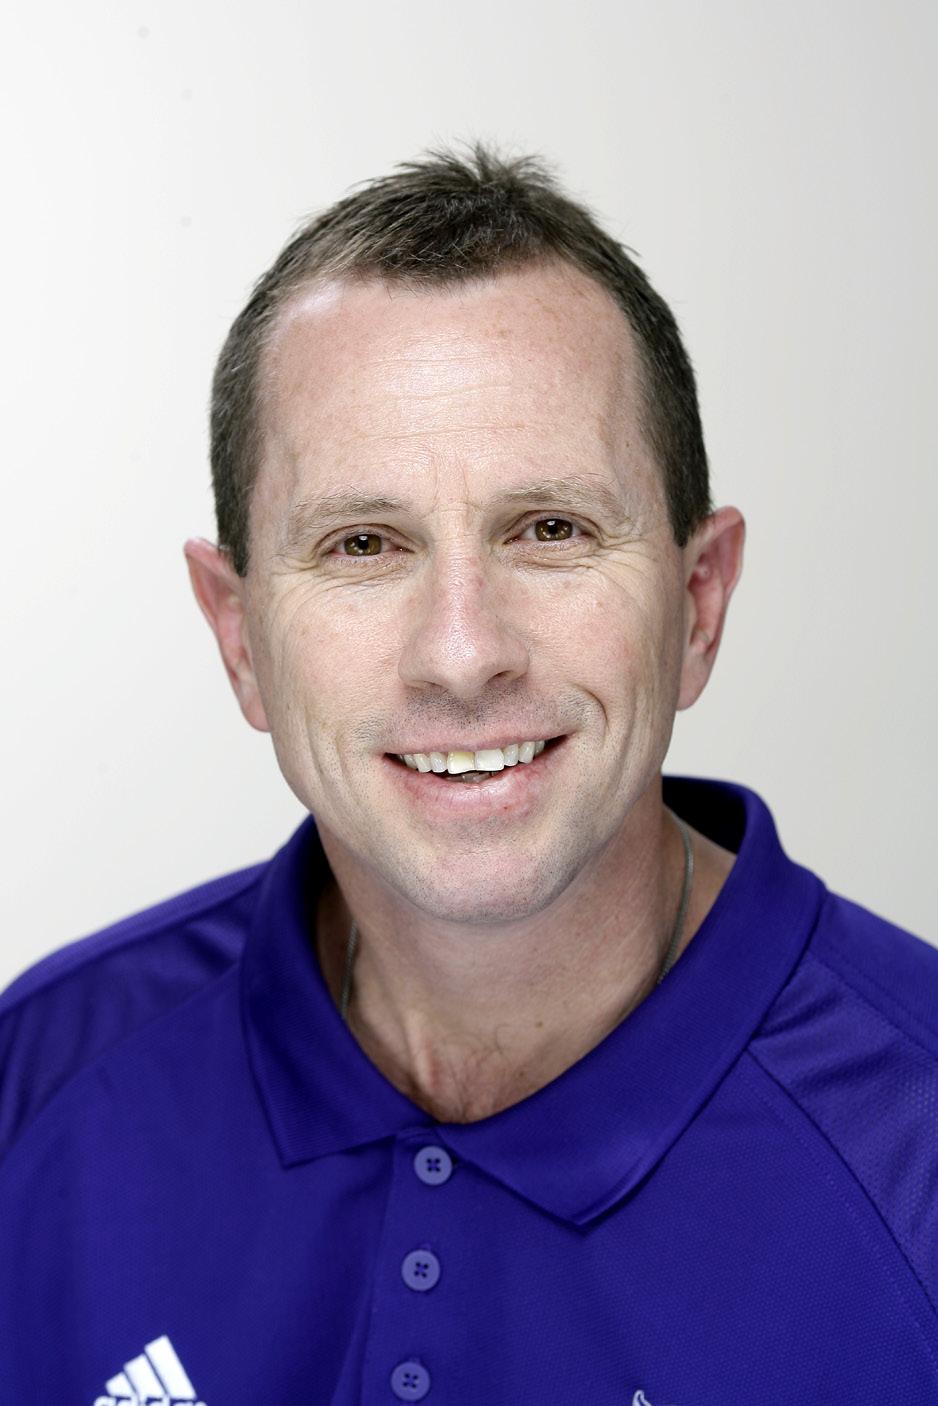 Head Coach RANDY RAHE Beginning his fifth season, Weber State head coach RAN- DY RAHE (ray) has established himself as one of the up and coming coaches in the NCAA Division I coaching ranks.